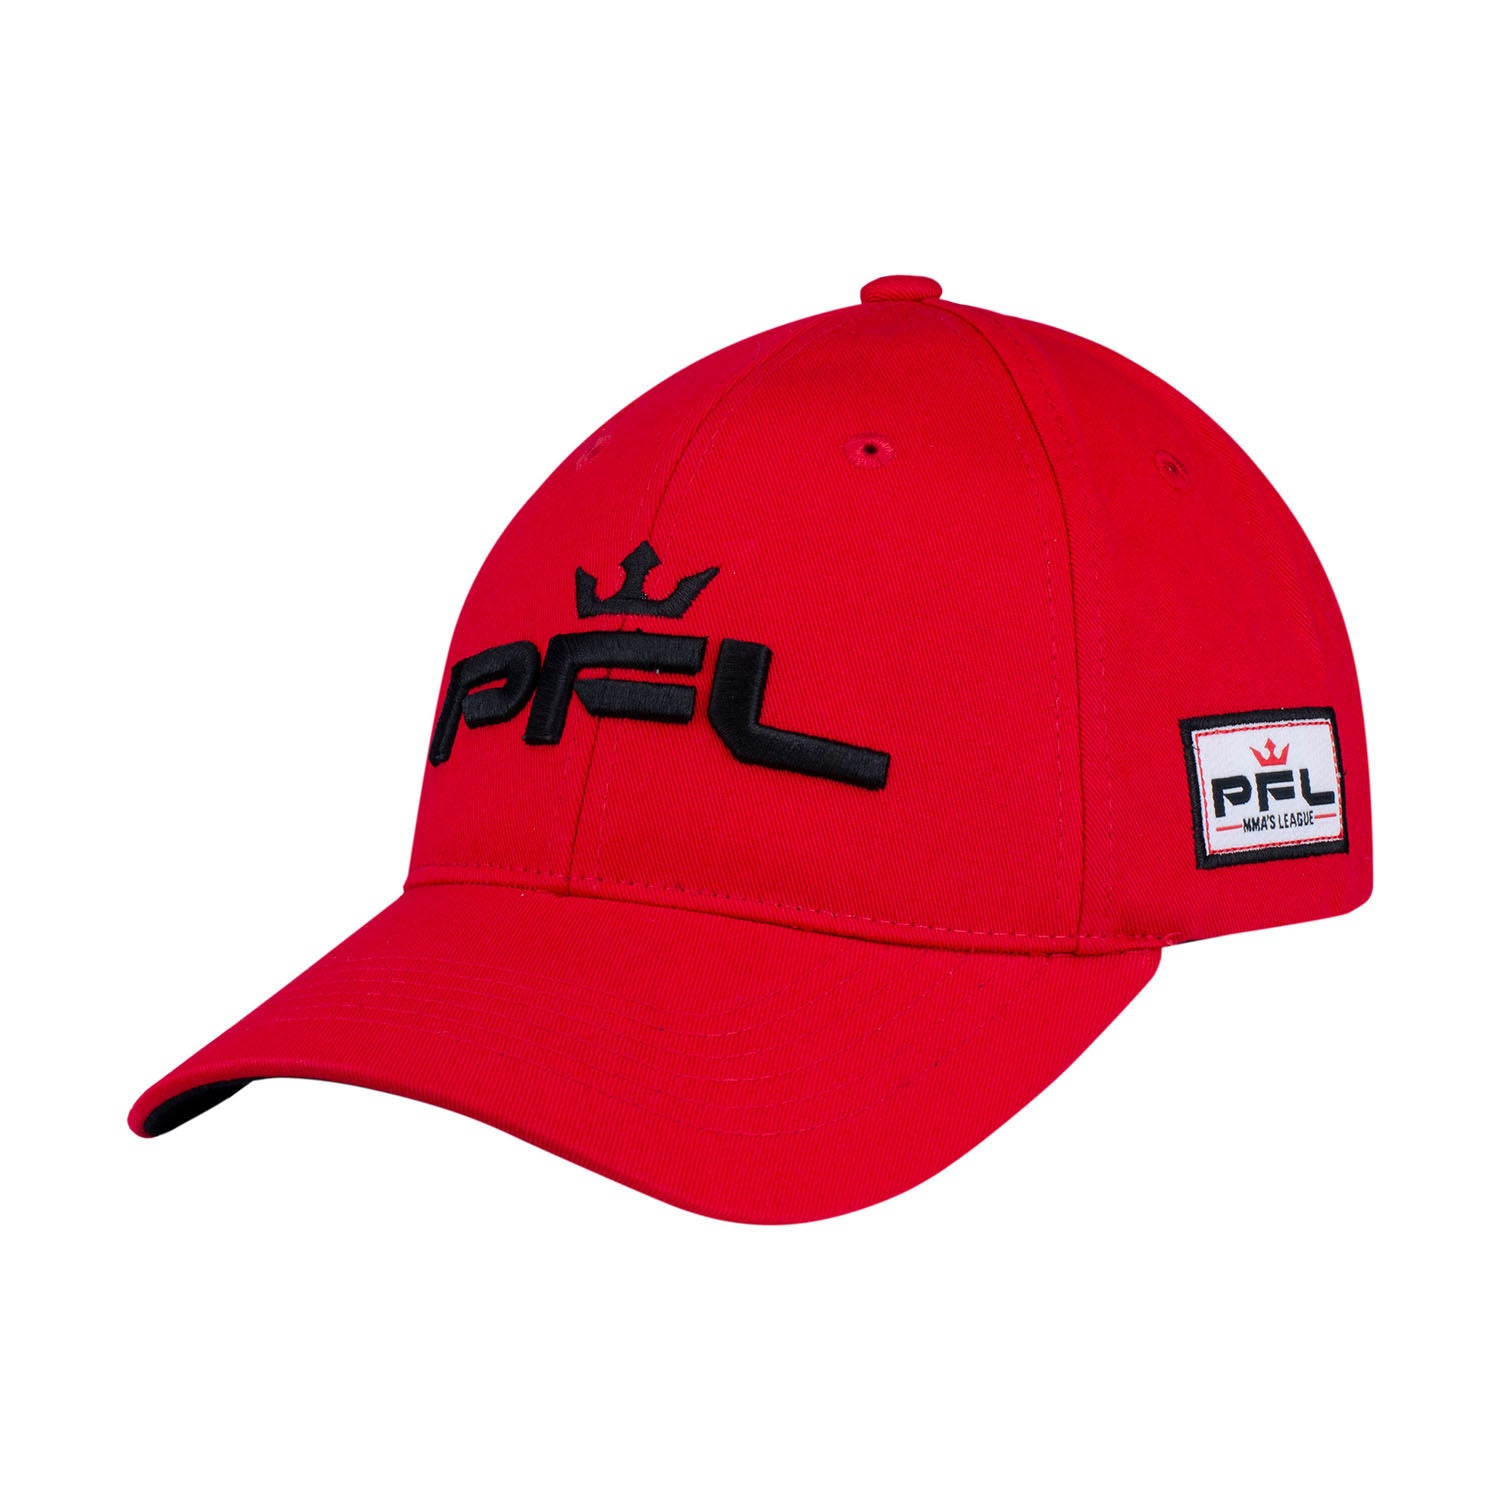 PFL Walkout Hat in Red - Left Side View